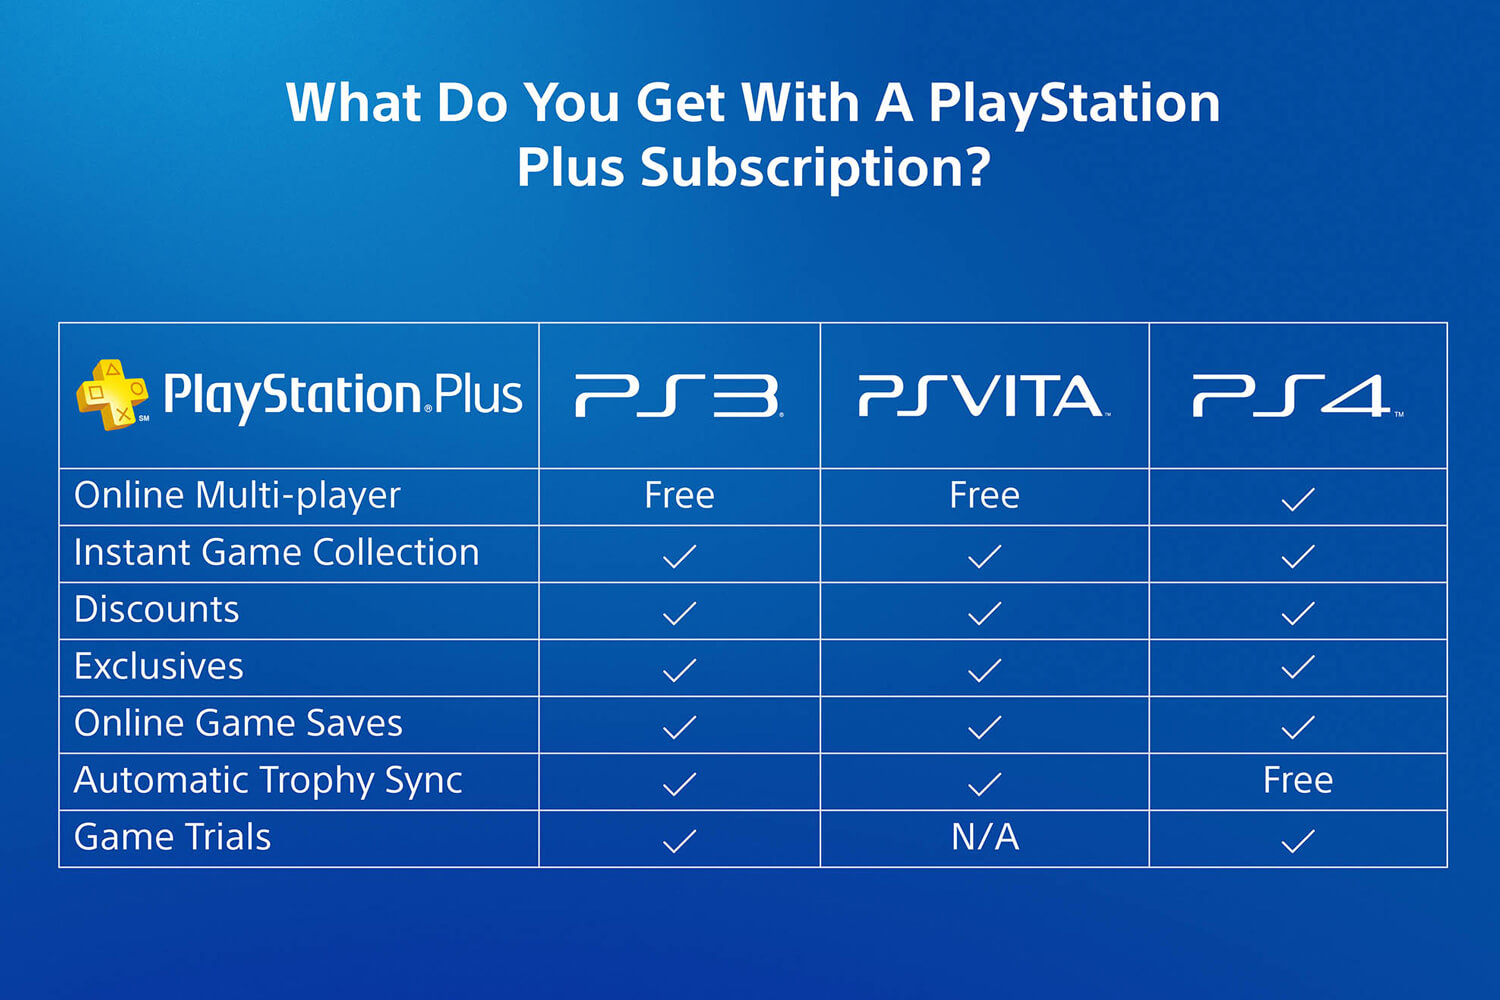 playstation plus 3 month